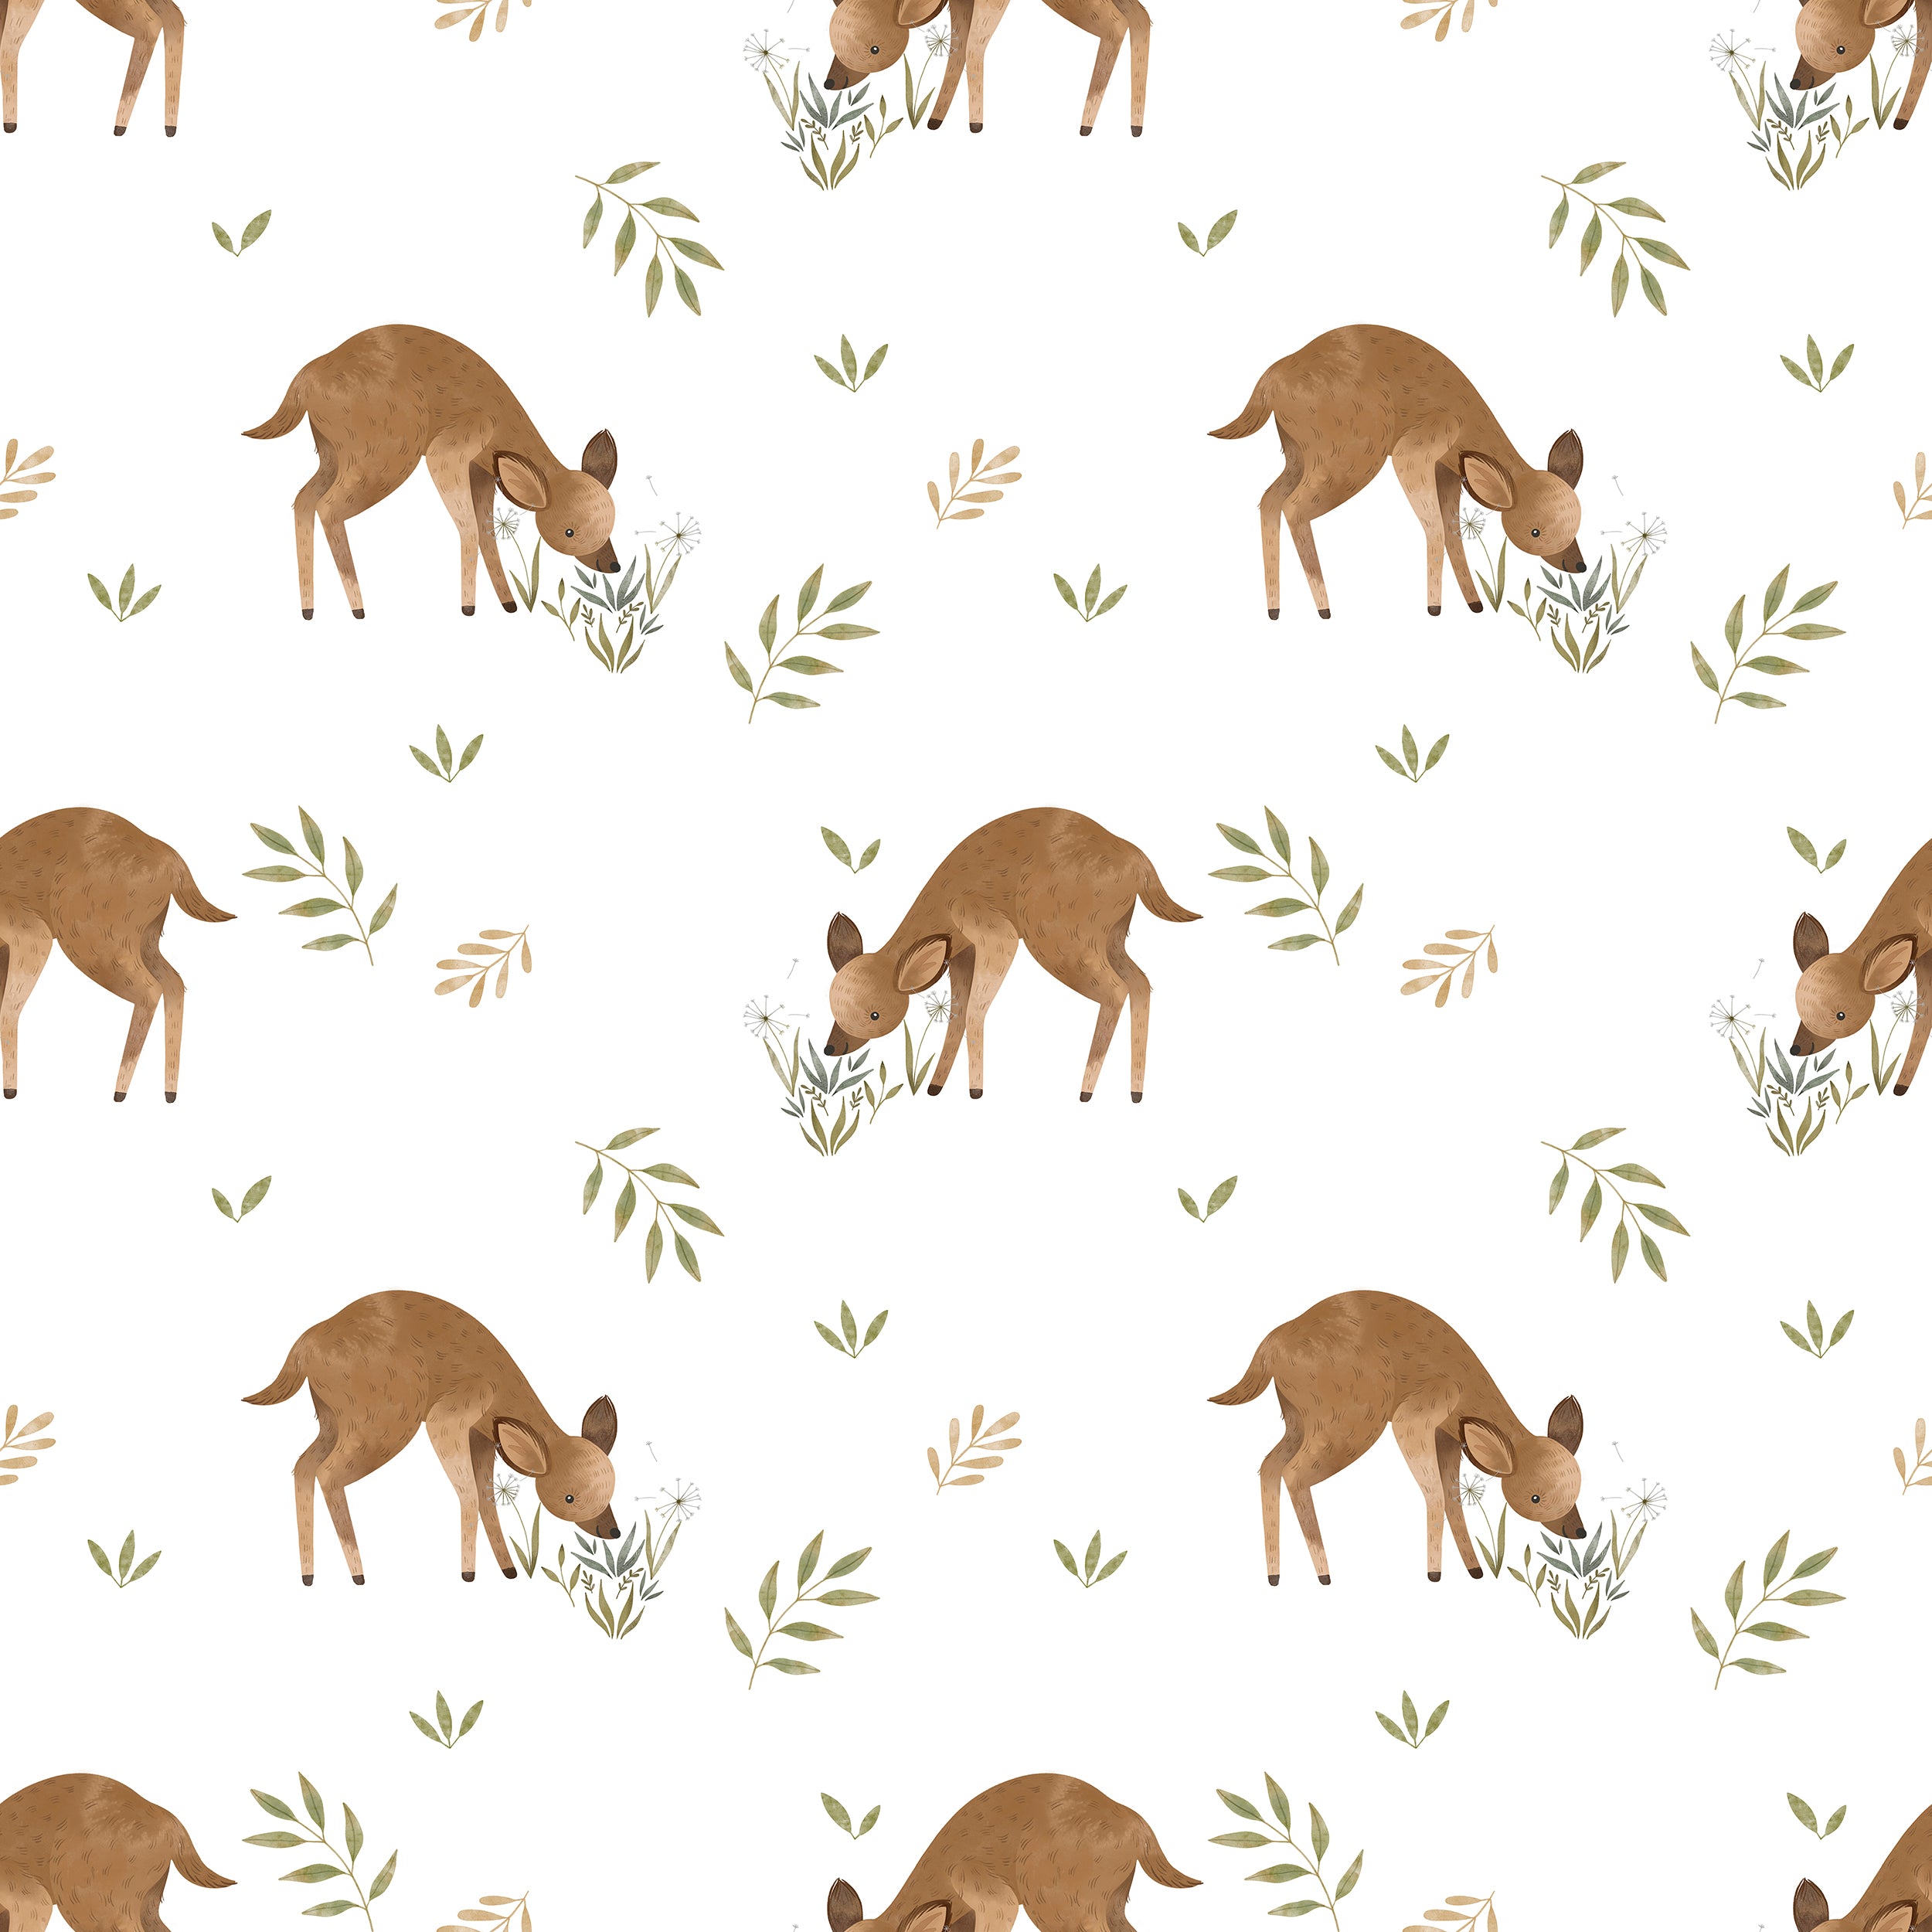 Close-up of Forest Fawn Wallpaper featuring charming illustrations of young fawns grazing among small flowers and green leaves on a clean white background, perfect for adding a serene touch to any room